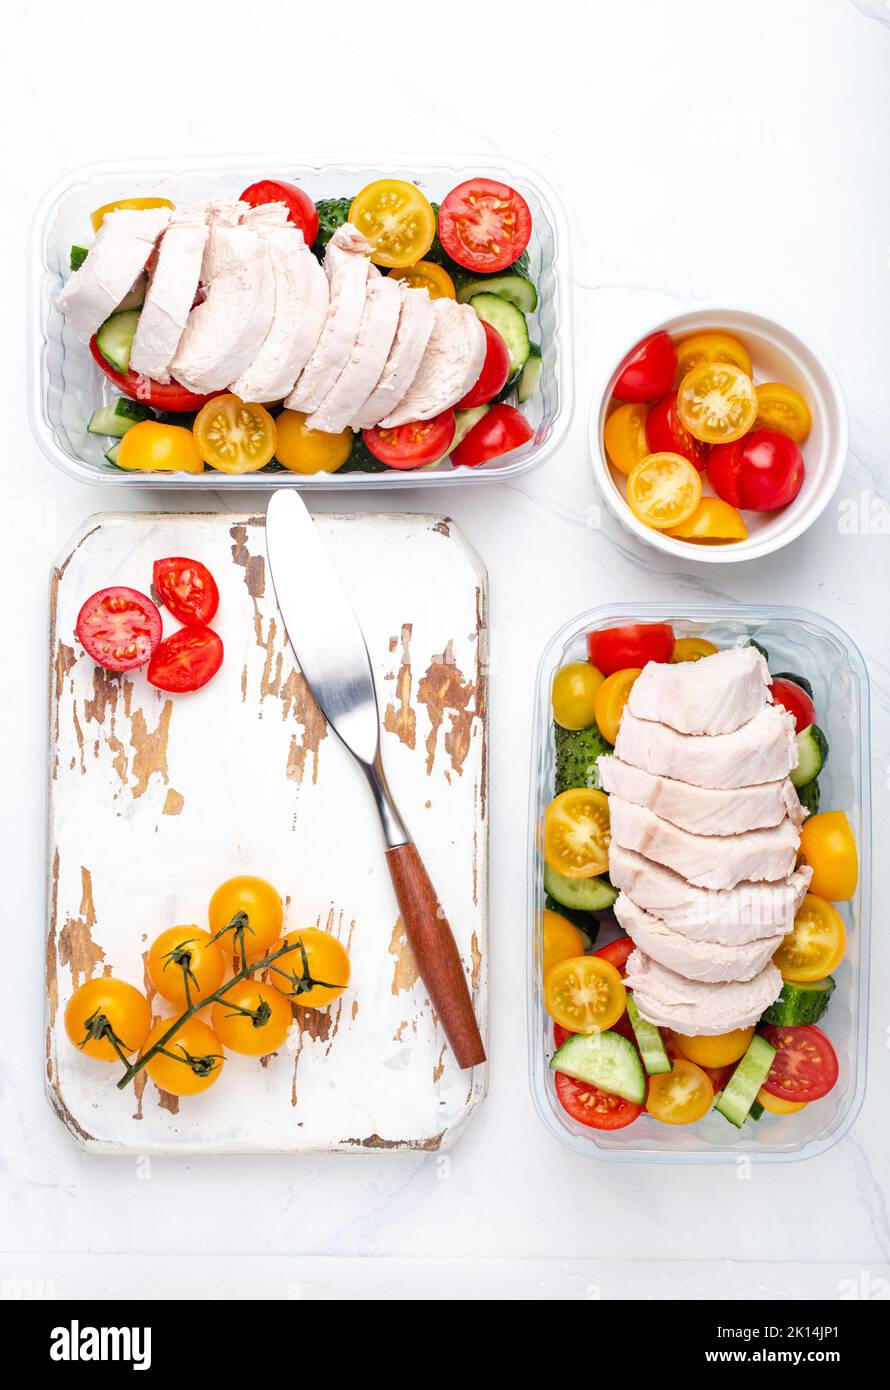 https://c8.alamy.com/comp/2K14JP1/meal-prep-lunch-boxes-containers-with-chicken-and-salad-top-view-2K14JP1.jpg